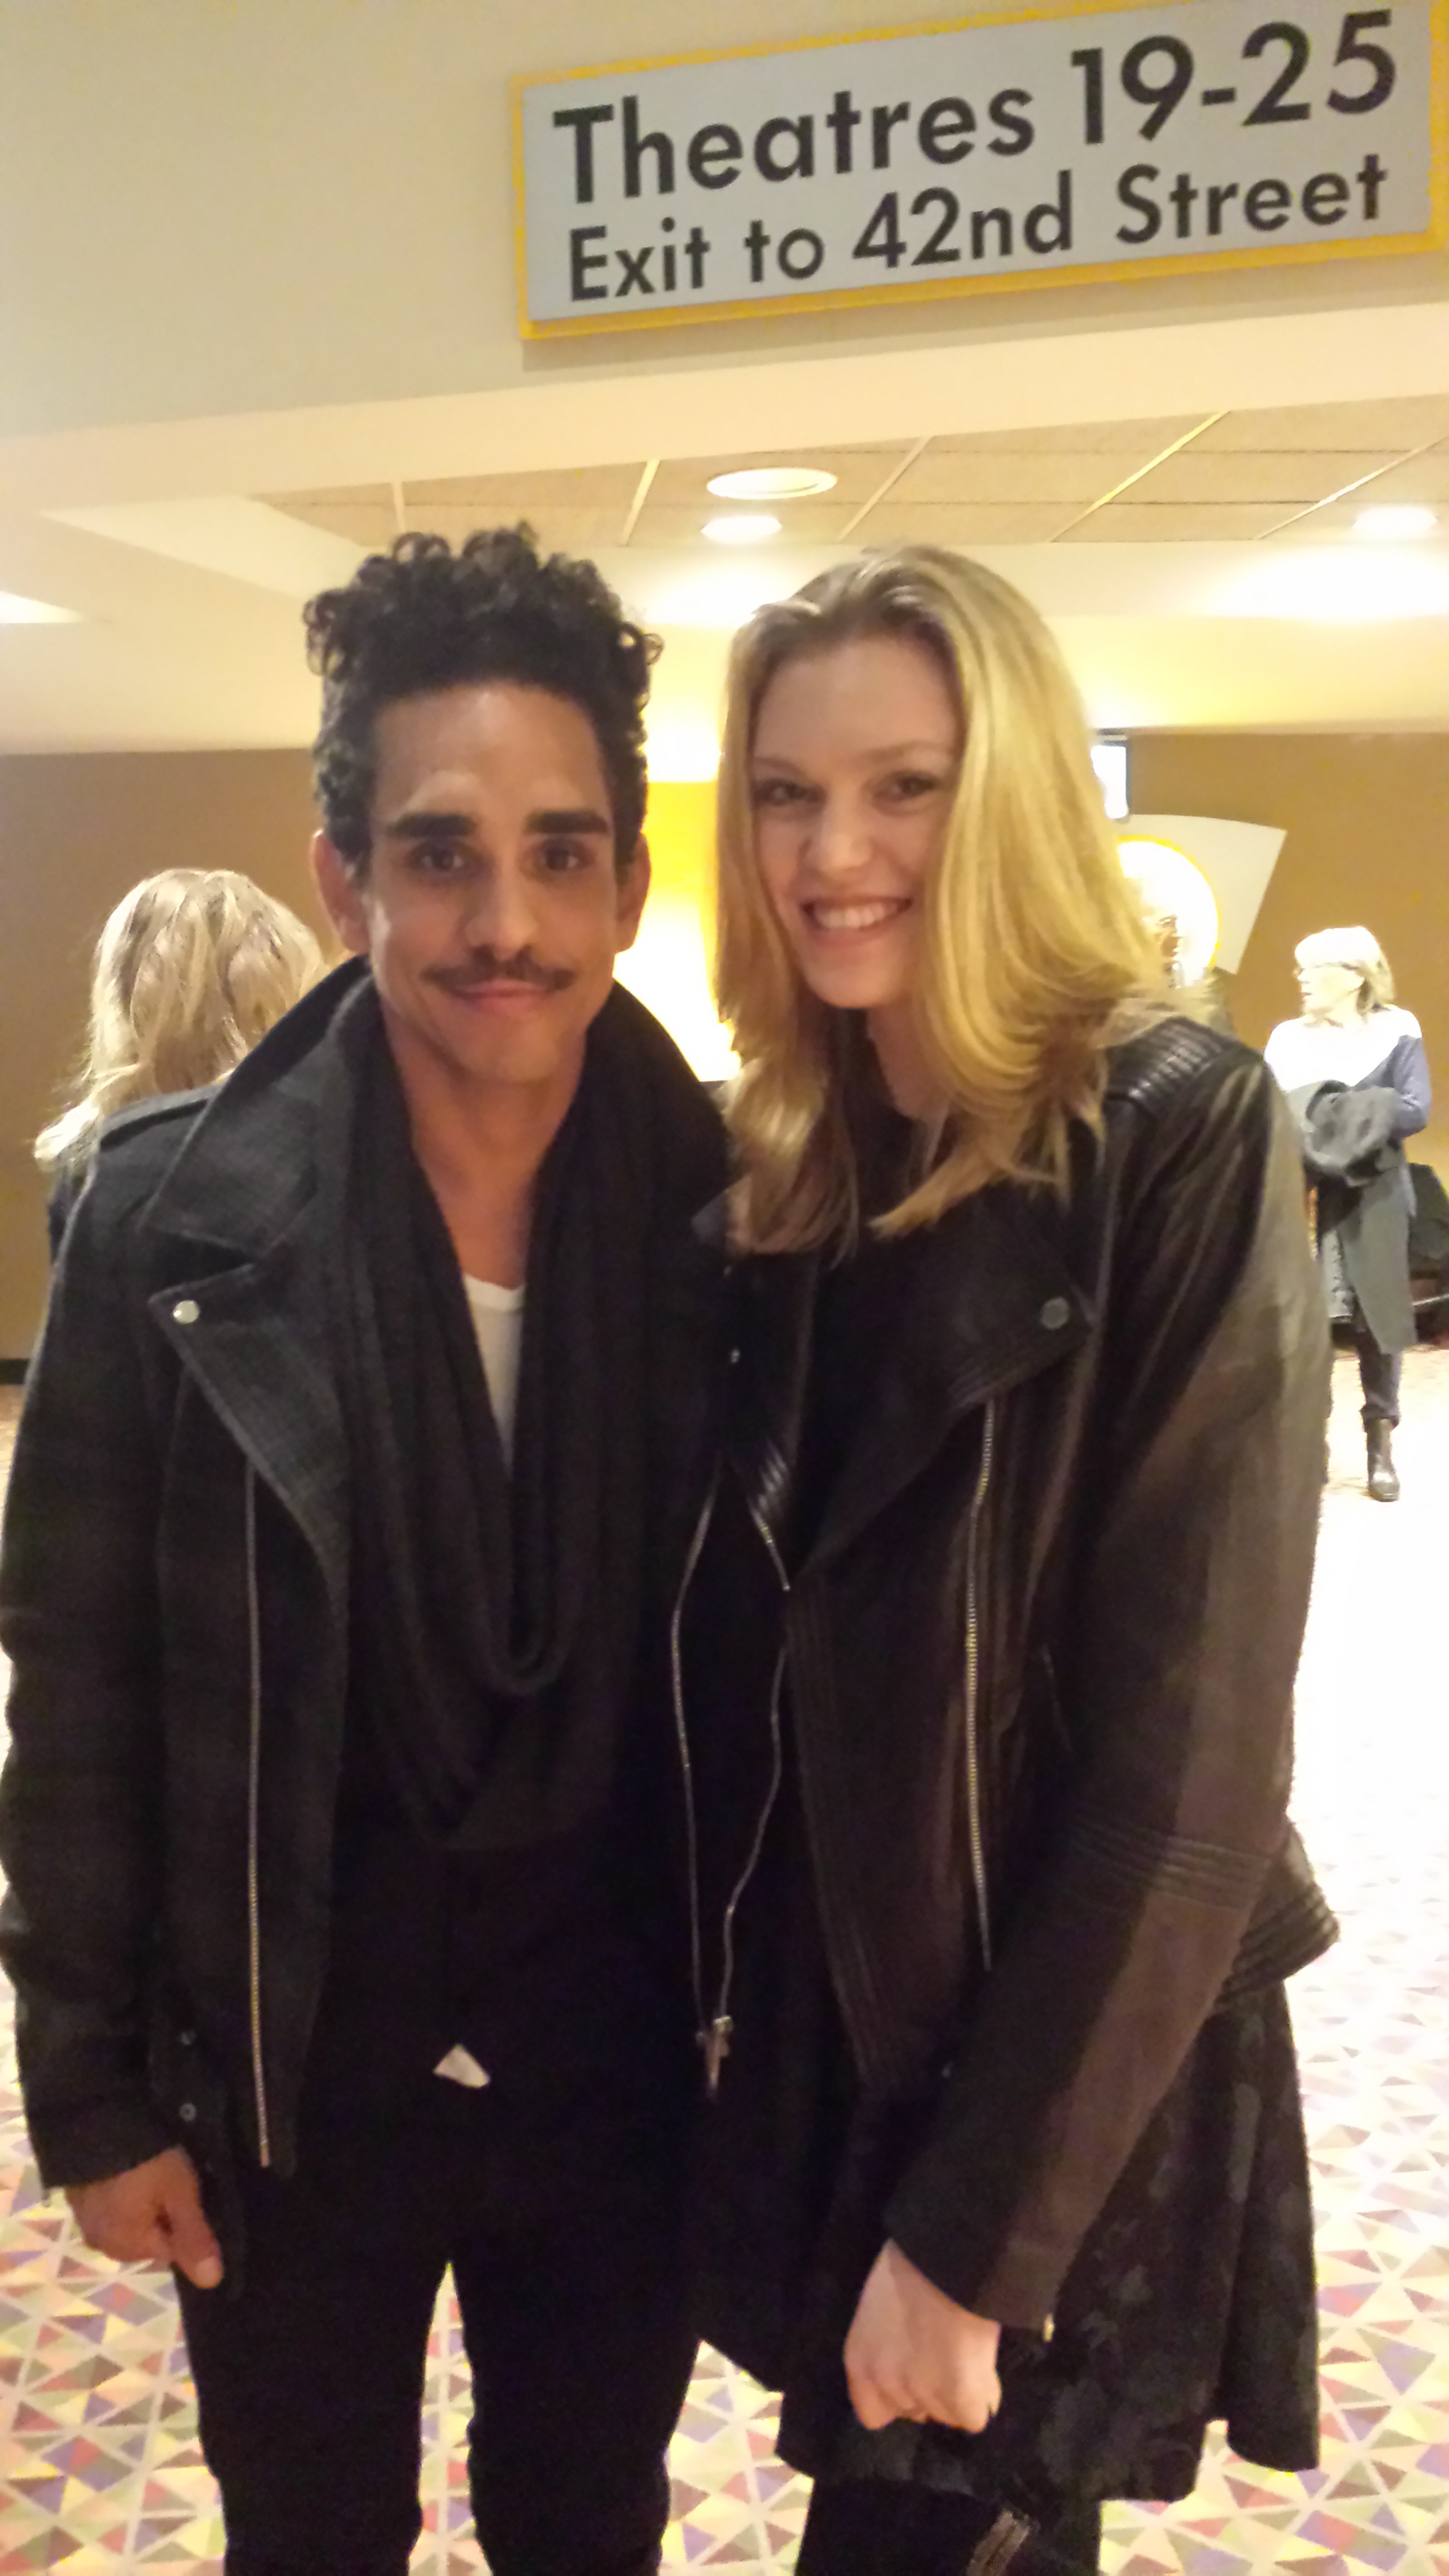 With actor Ray Santiago at Sex Ed premiere in NYC Nov 7th.